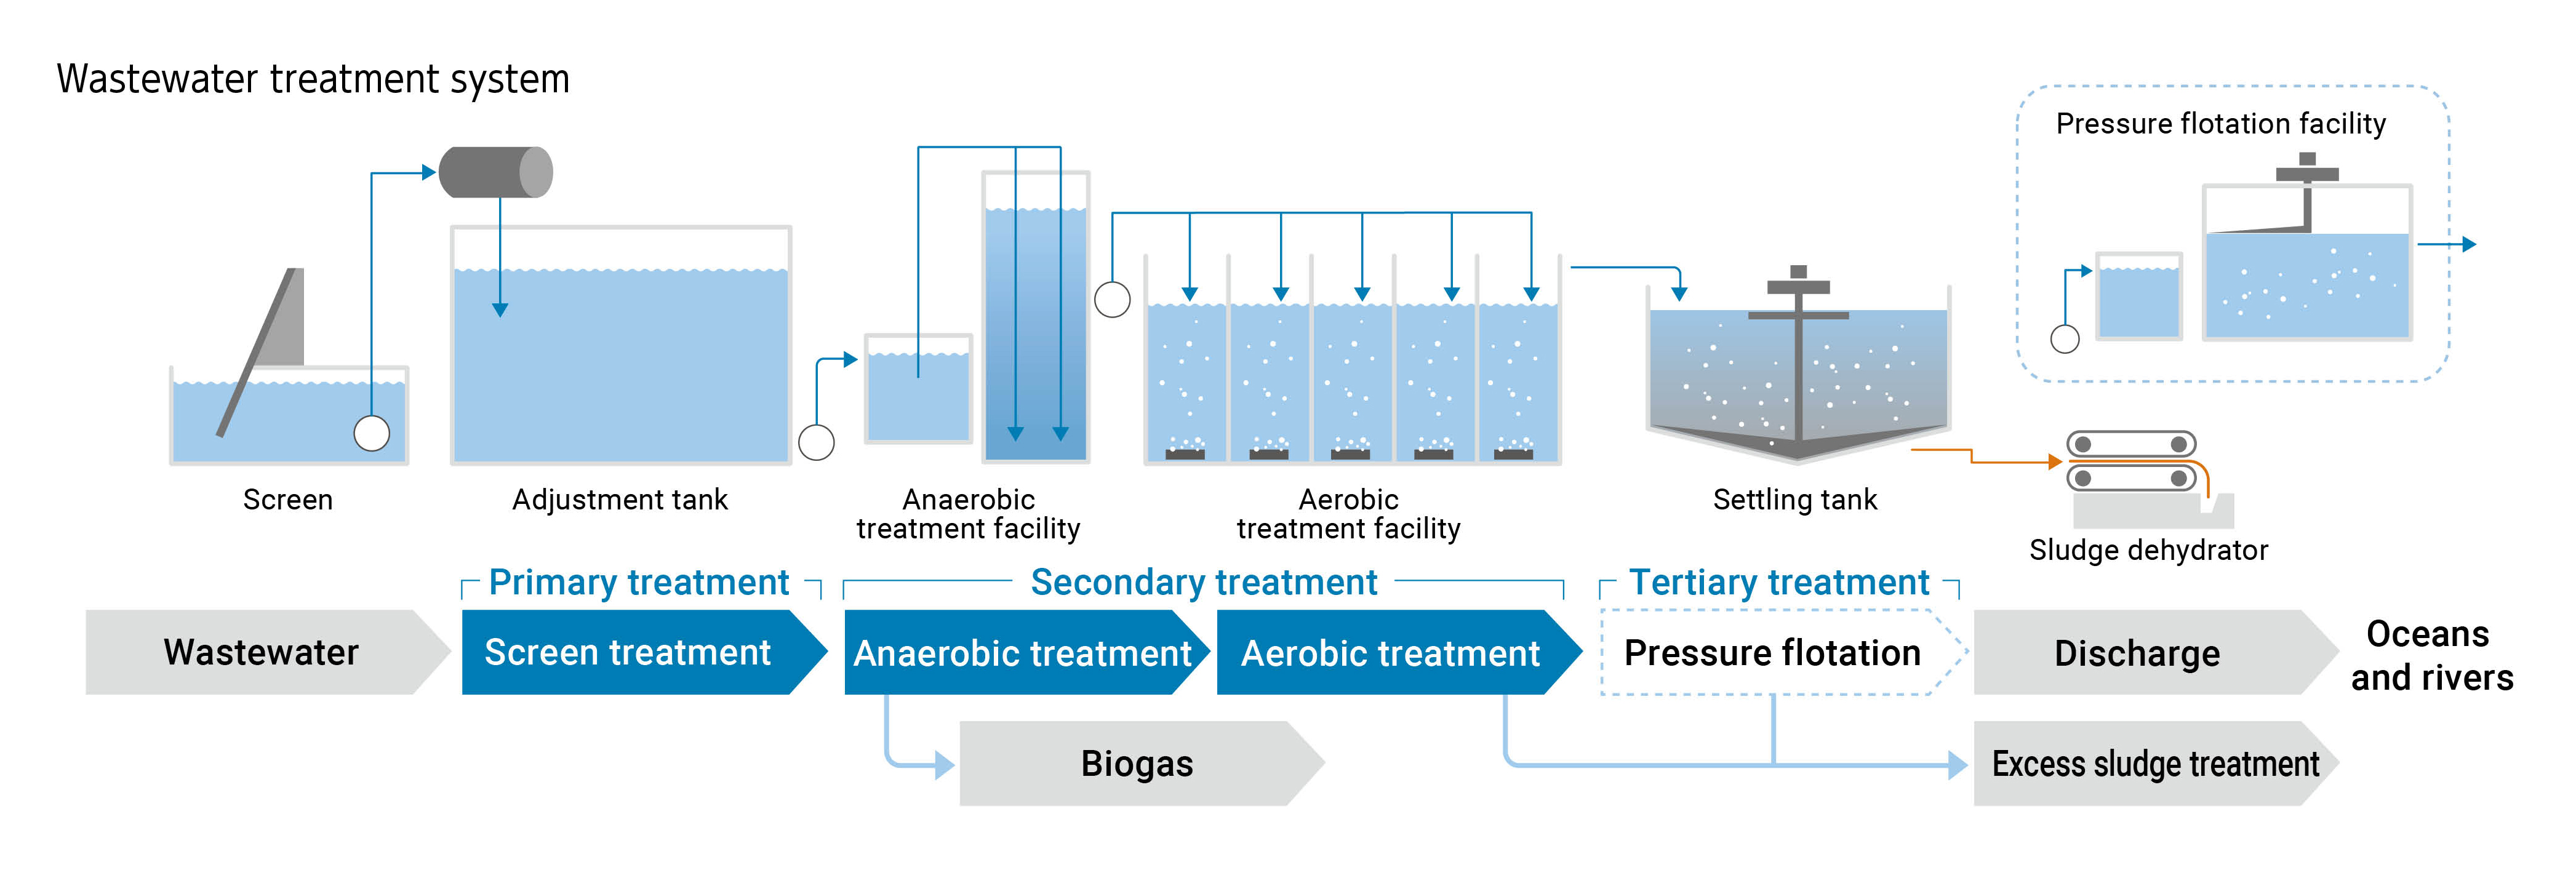 Figure: Wastewater treatment system